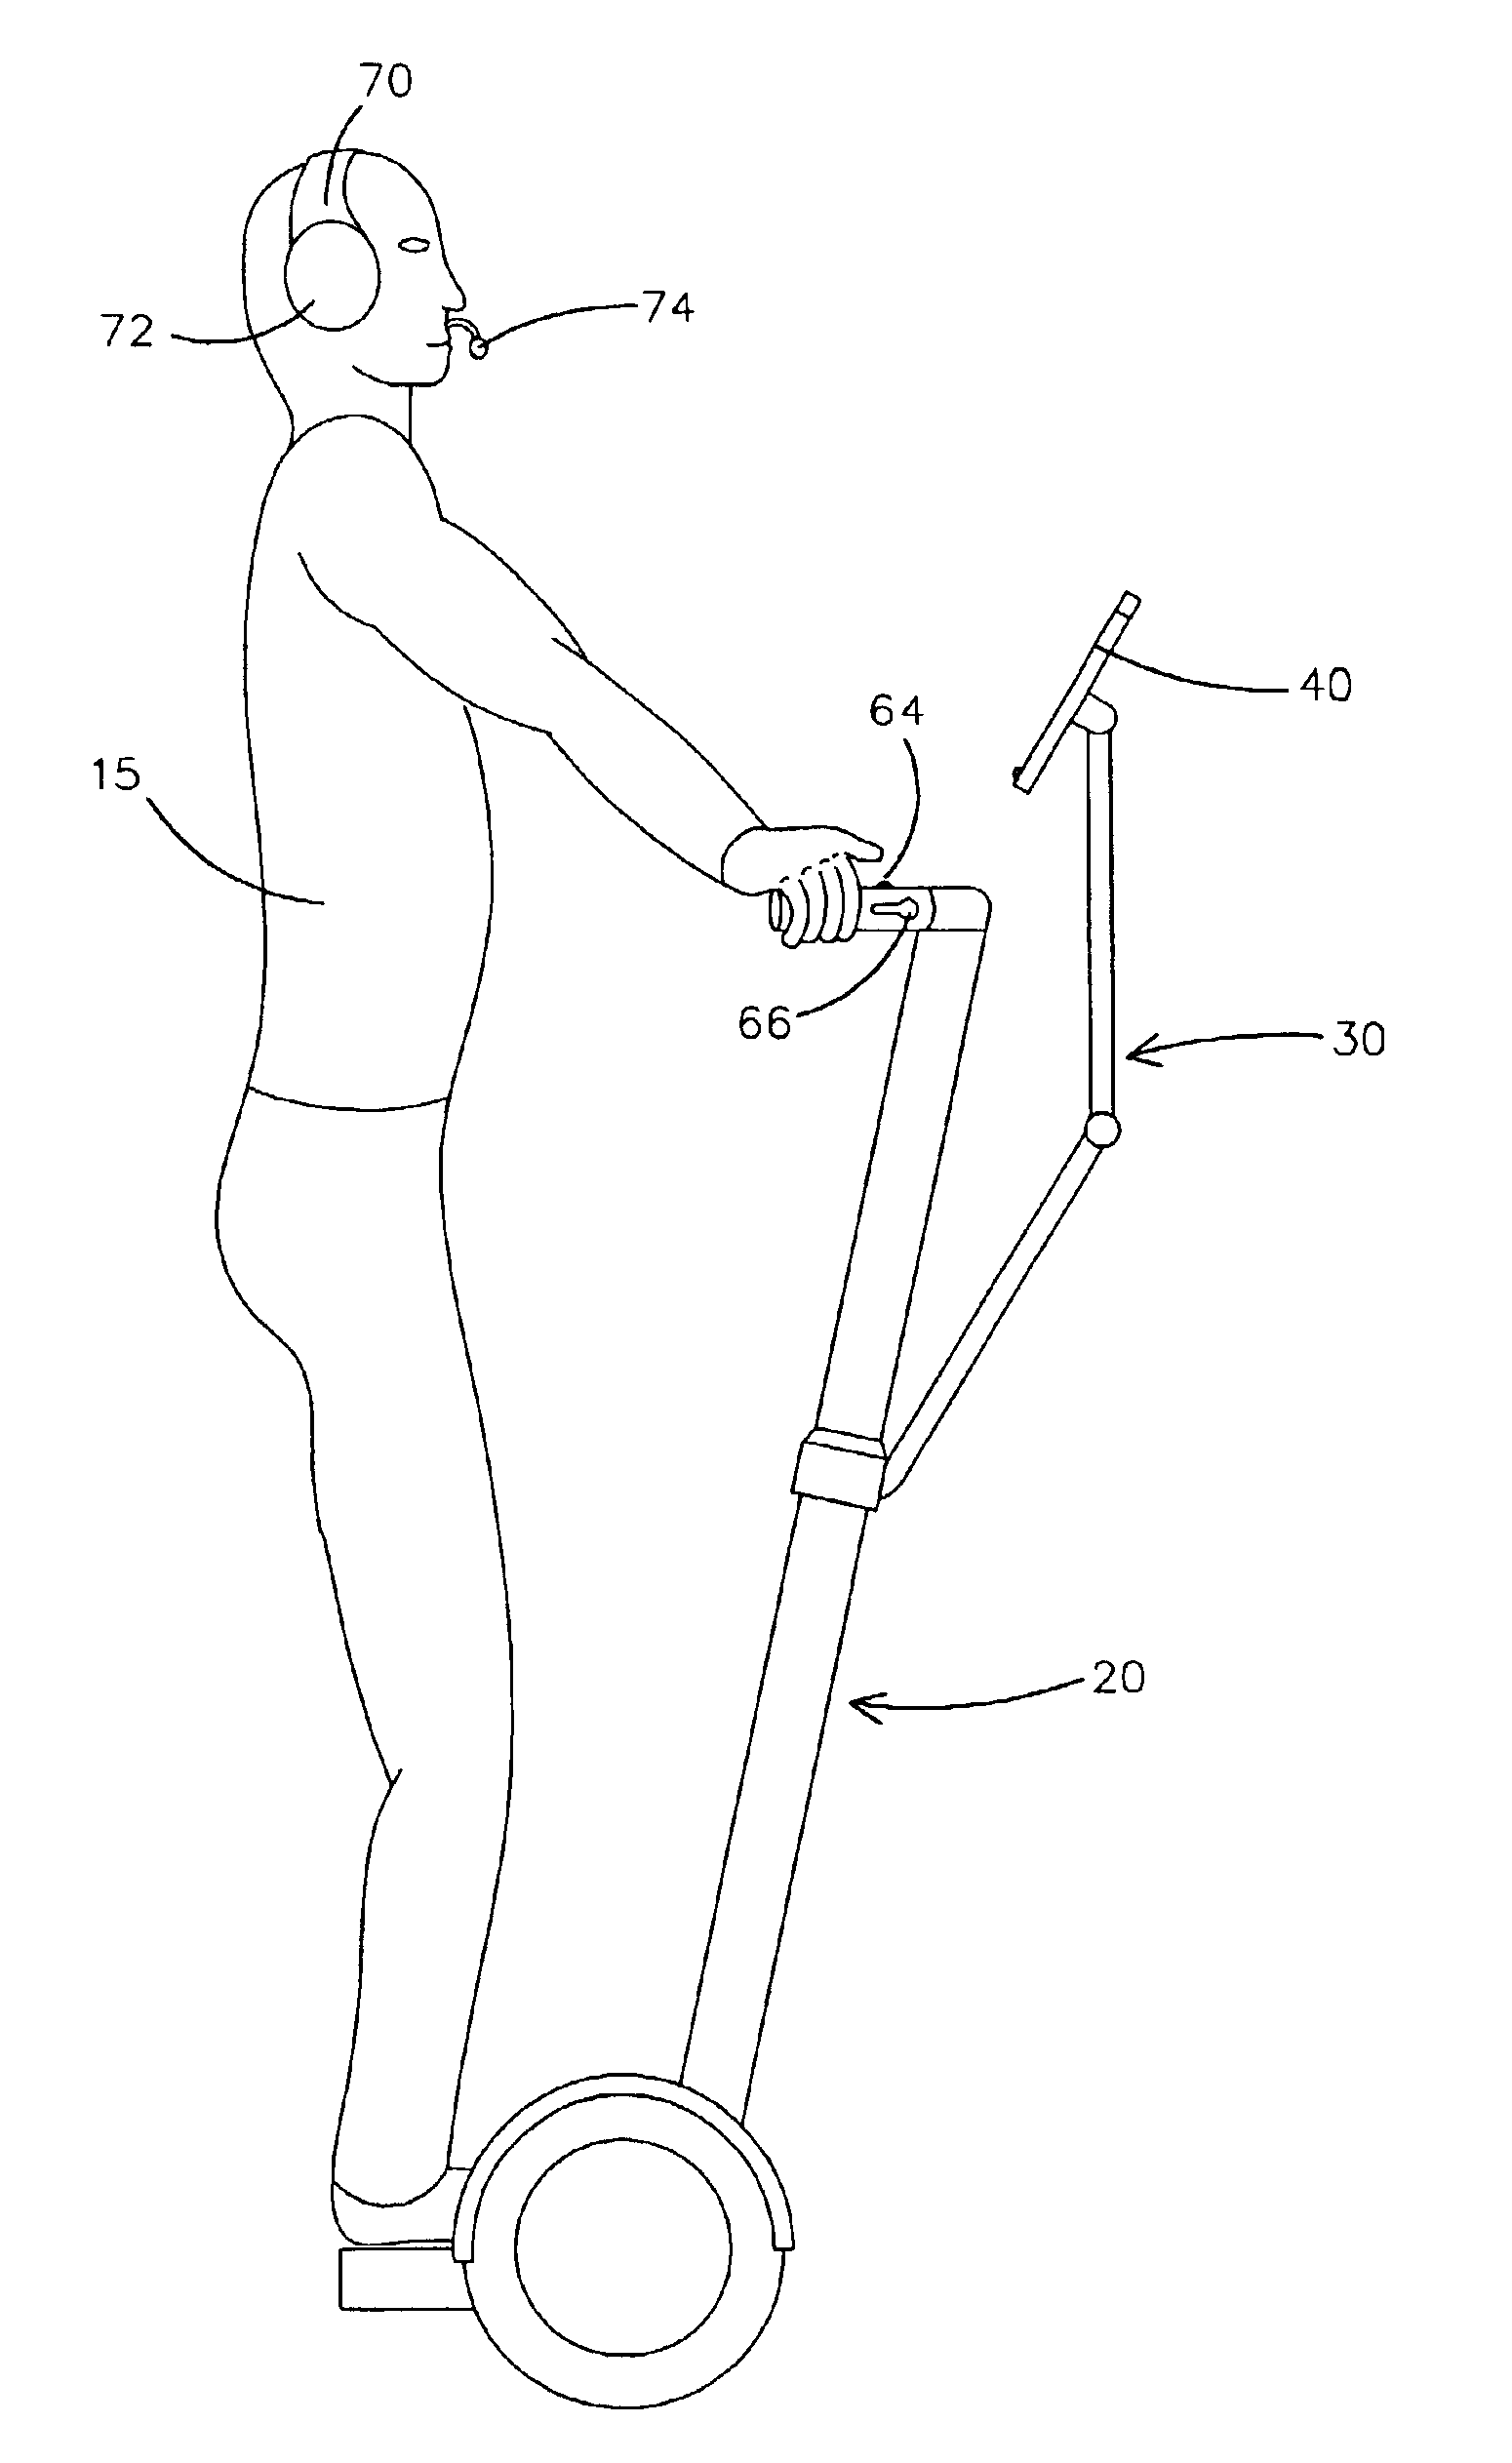 Computer-equipped mobility device